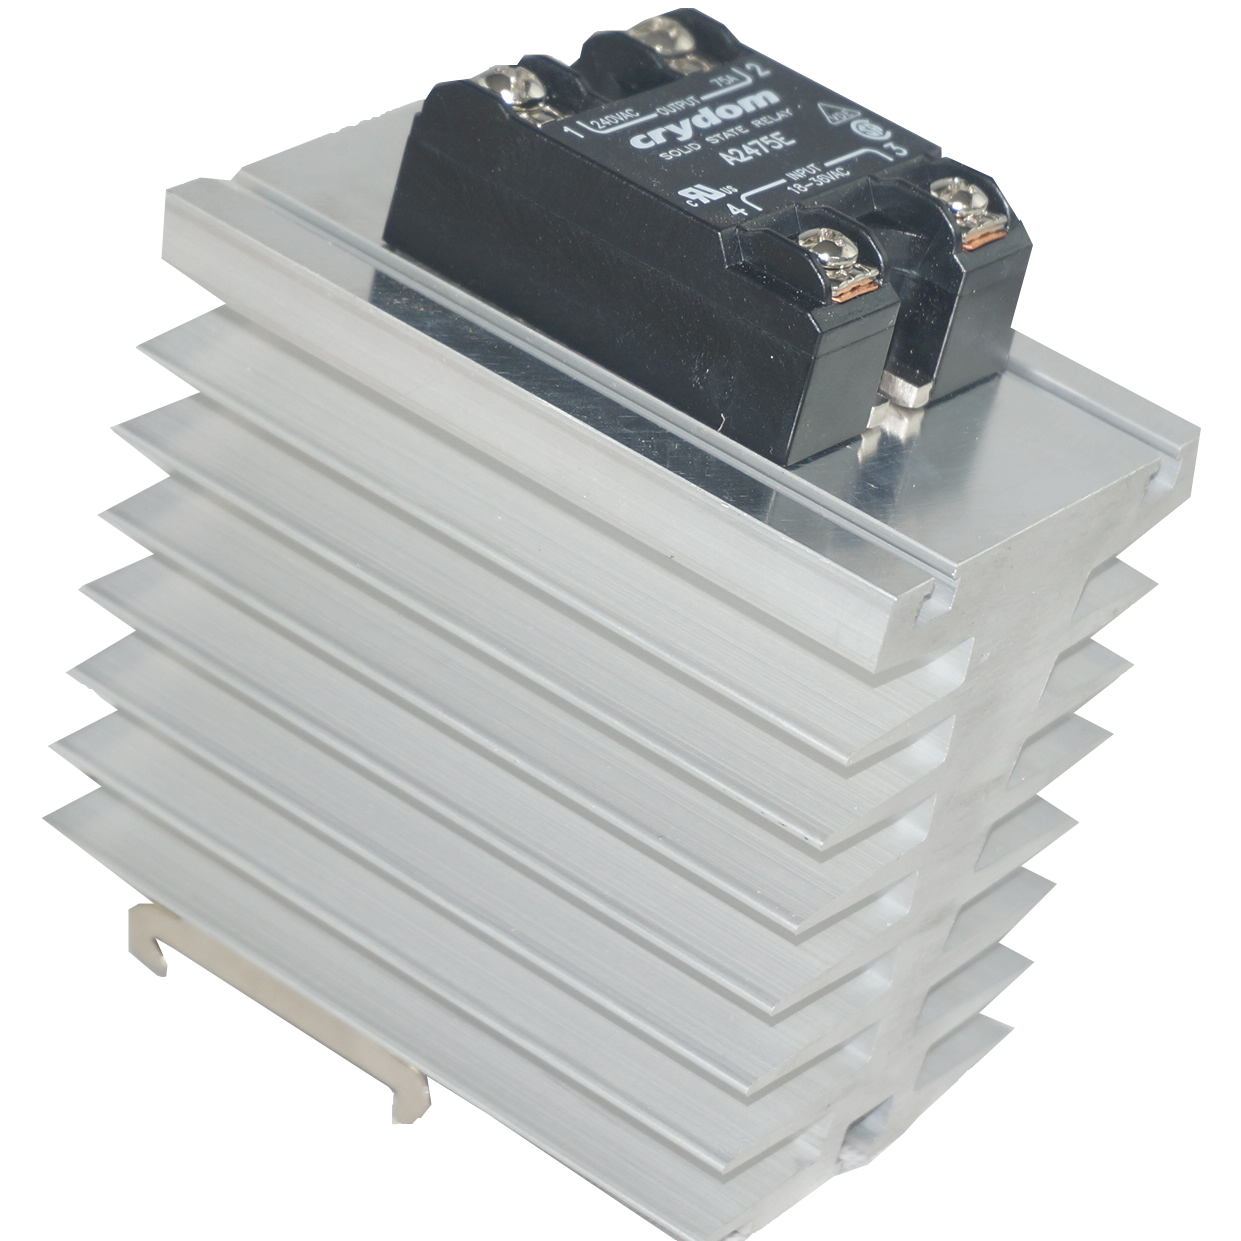 GFIN/100M-DR + D1D80, Din Rail Mount DC Solid State Relay with Heatsink 4-32VDC control, 63A @ 40 Deg C, 100VDC Load